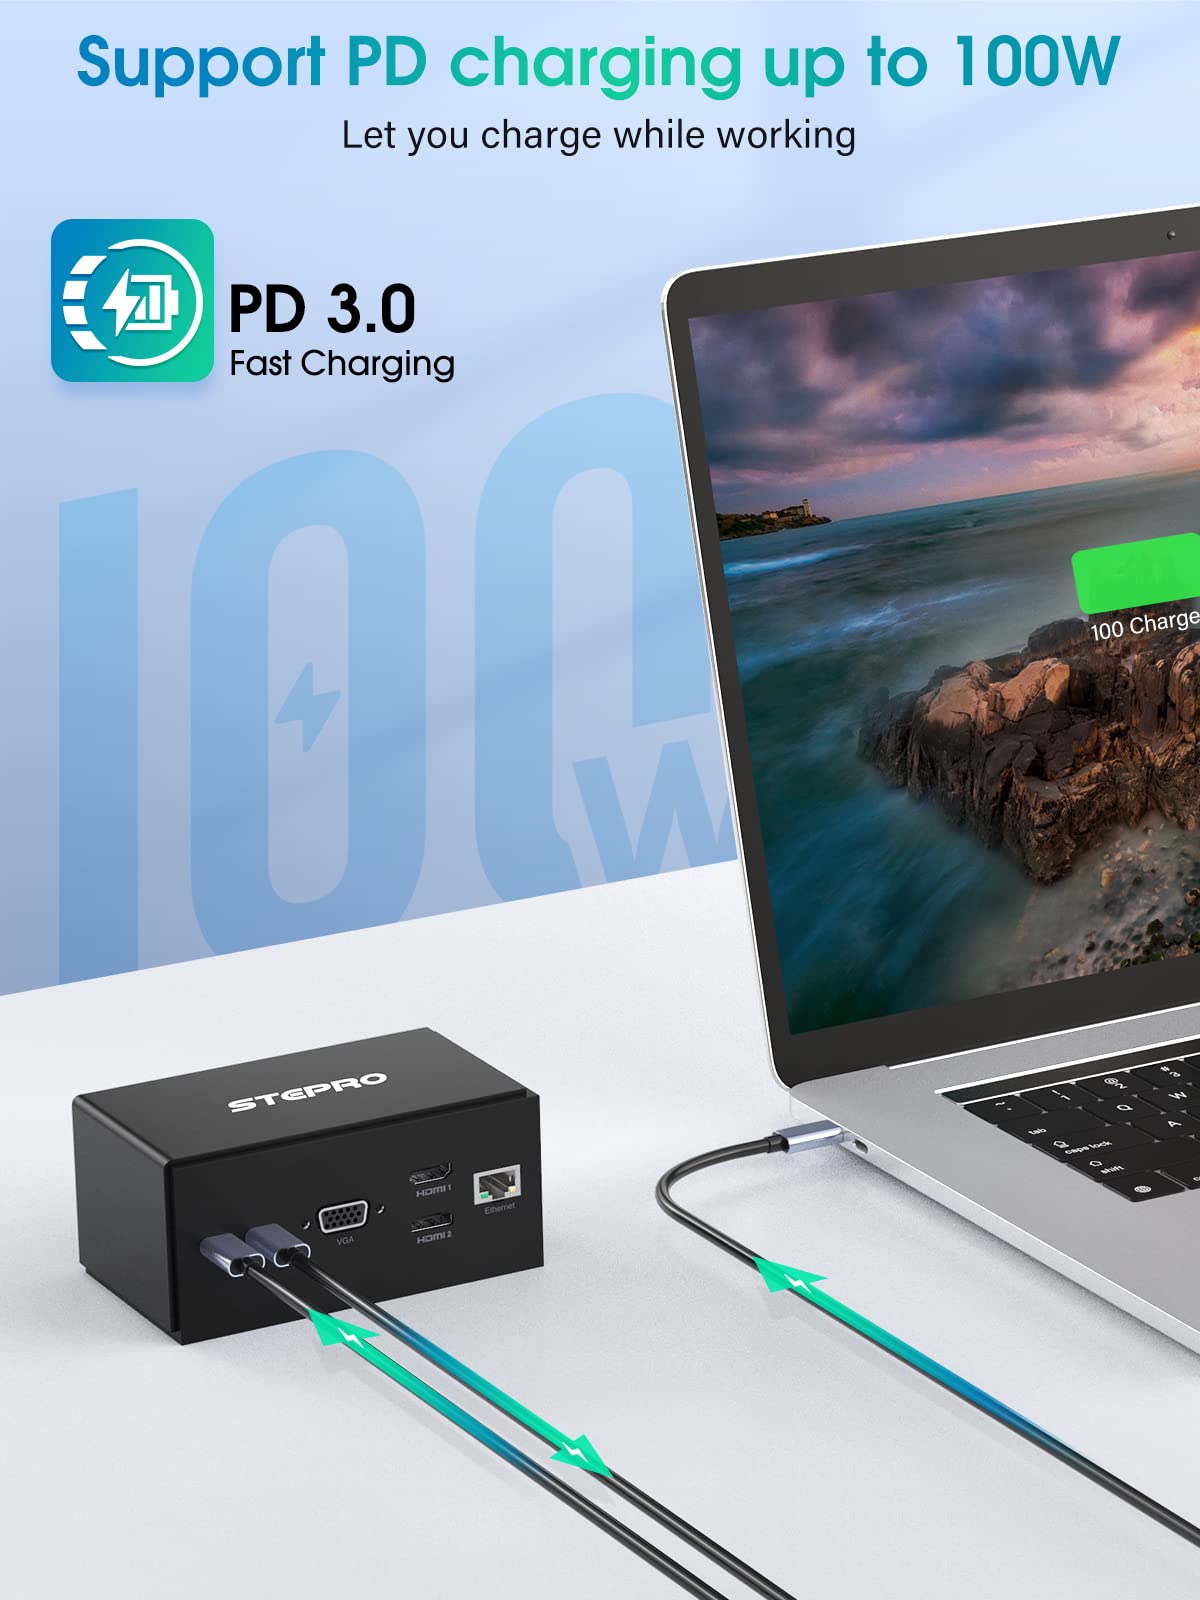 Docking Station, STEPRO 14 in 1 USB C Docking Station Quadruple Monitor Compatible for MacBook and Windows, Thunderbolt Dock with USB-A and USB-C Cable(2HDMI,VGA,PD3.0,RJ45,4 USB Ports,SD/TF,Audio)